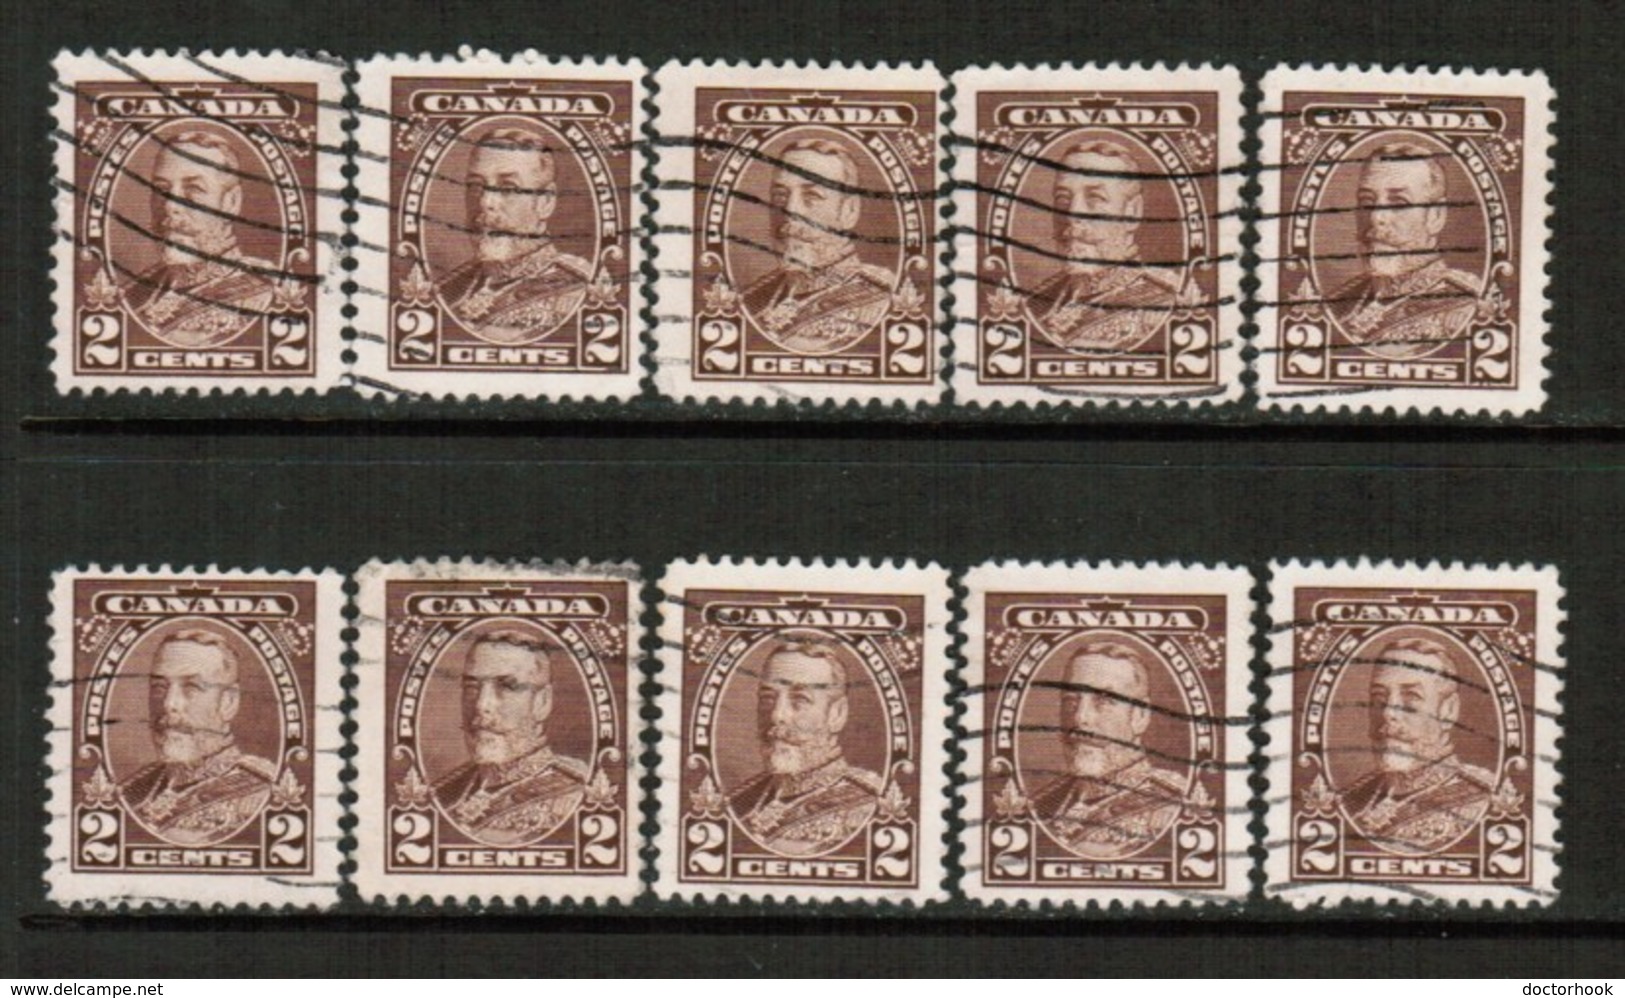 CANADA  Scott # 218 USED WHOLESALE LOT OF 10 (WH-299) - Lots & Kiloware (mixtures) - Max. 999 Stamps